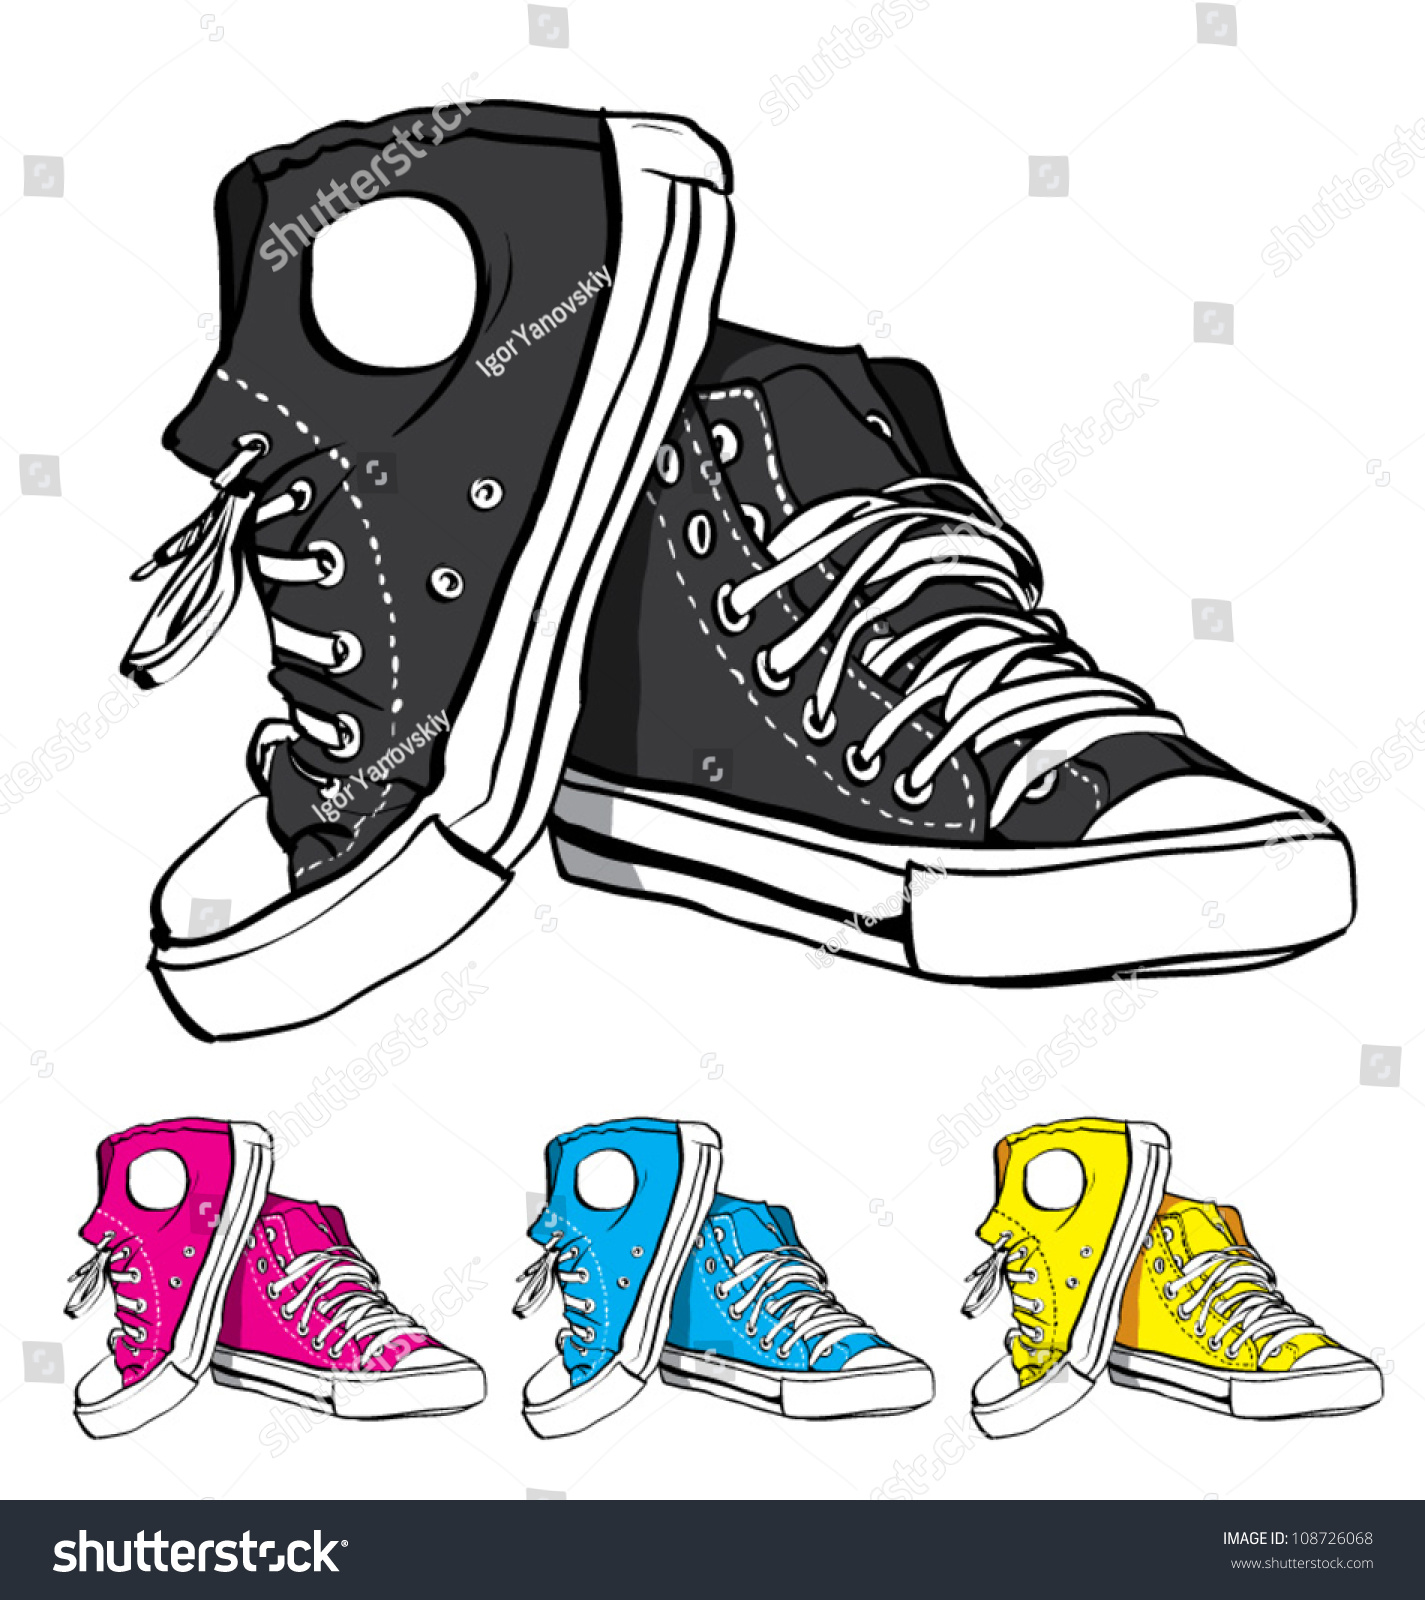 Sneakers Stock Vector (Royalty Free) 108726068